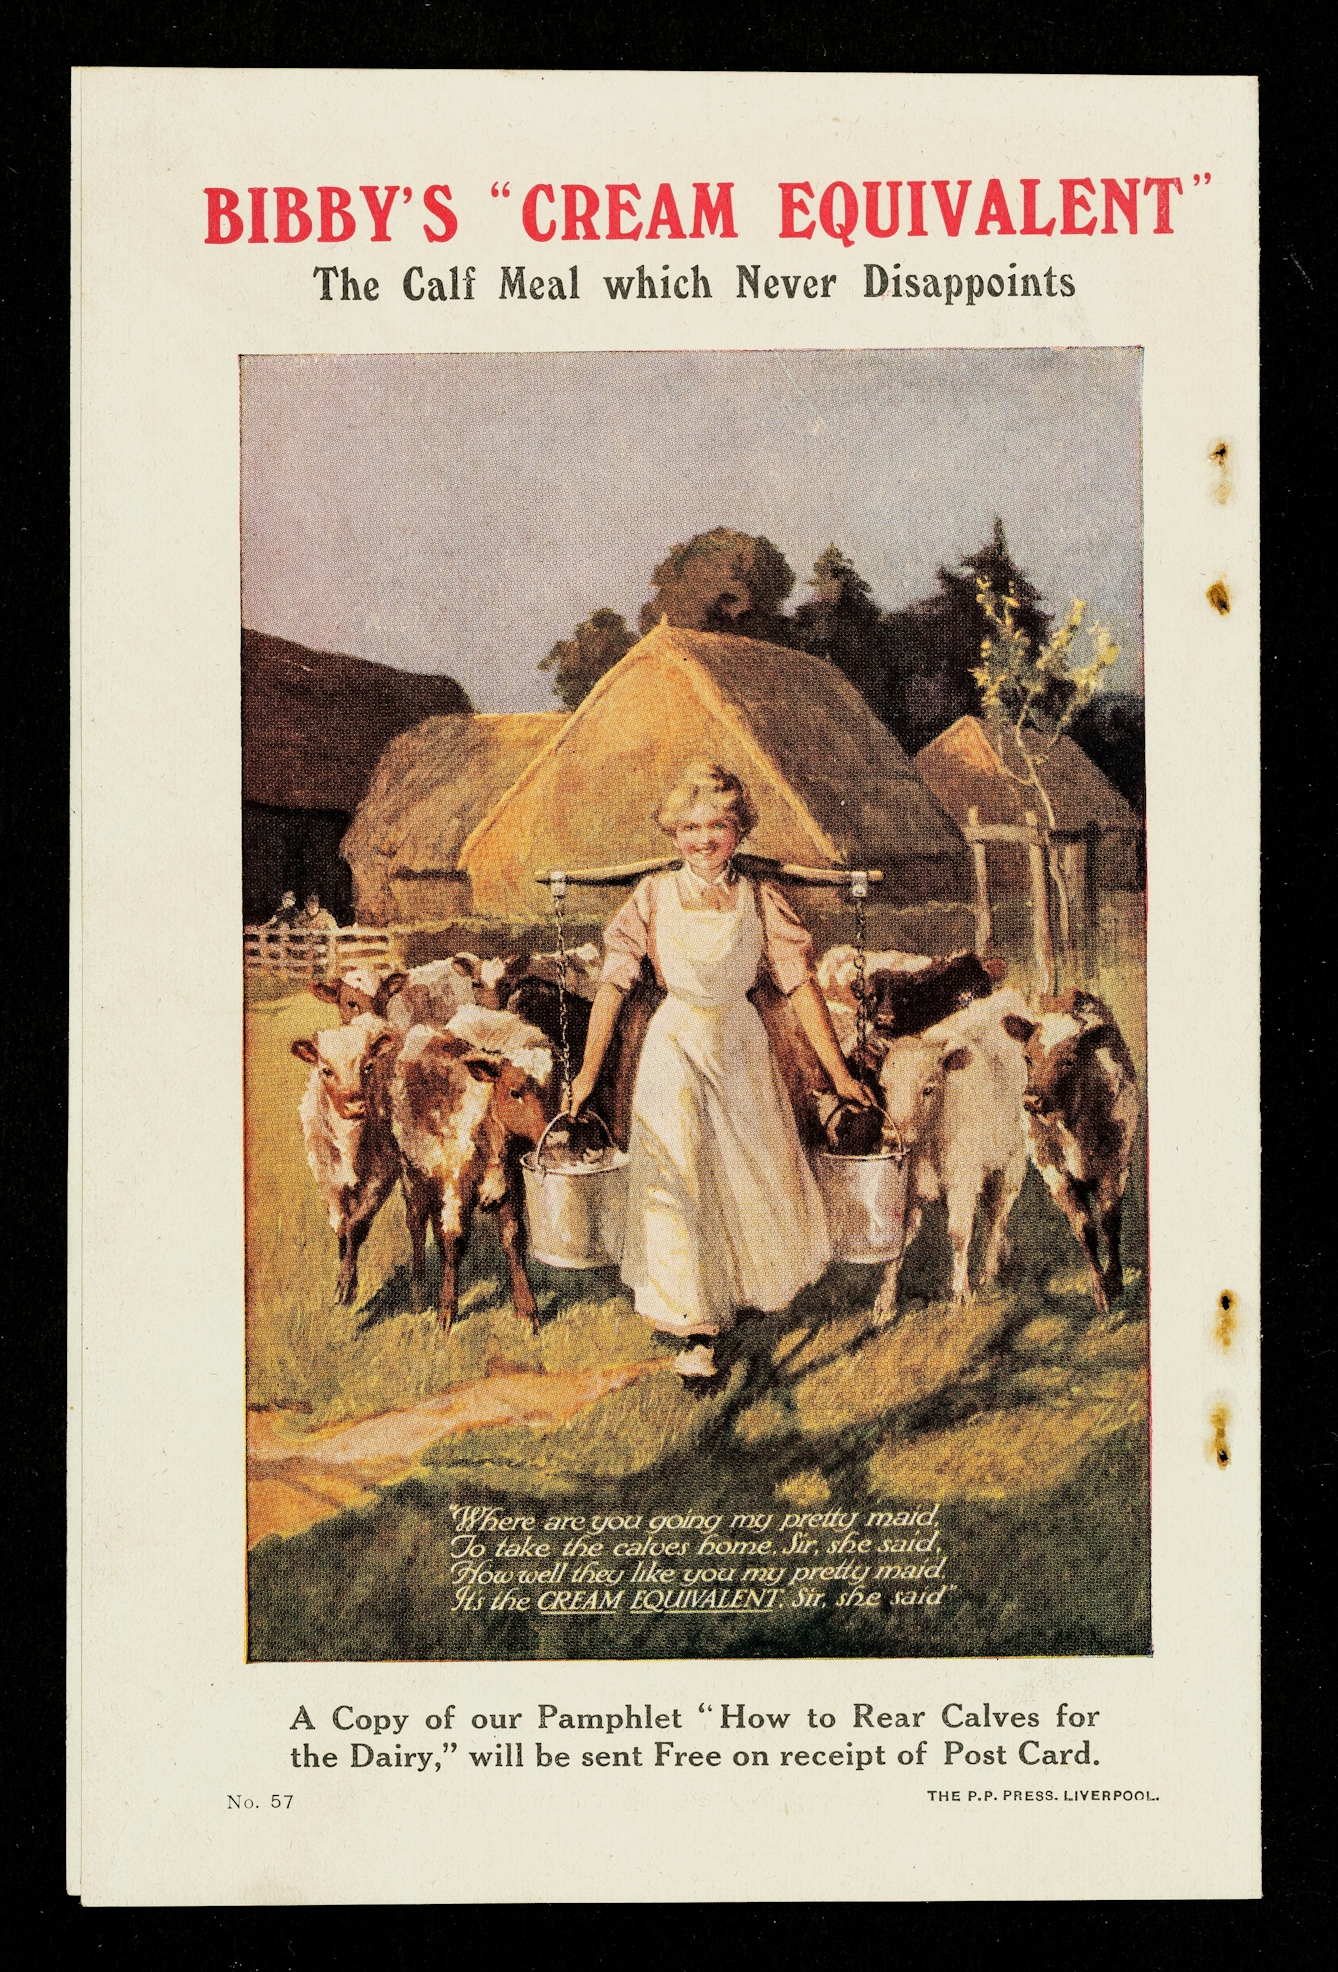 Colour illustration from a magazine showing a cheerful blond milkmaid in a full-length white apron and short-sleeved pink dress bearing 2 buckets on a yoke across her shoulders, followed by a herd of calves, with 3 haystacks and a barn behind them, advertising Bibby's "Cream Equivalent". Text reads "Where are you going my pretty maid, To take the calves home sir, she said, How well they like you my pretty maid, It's the cream equivalent, sir, she said."